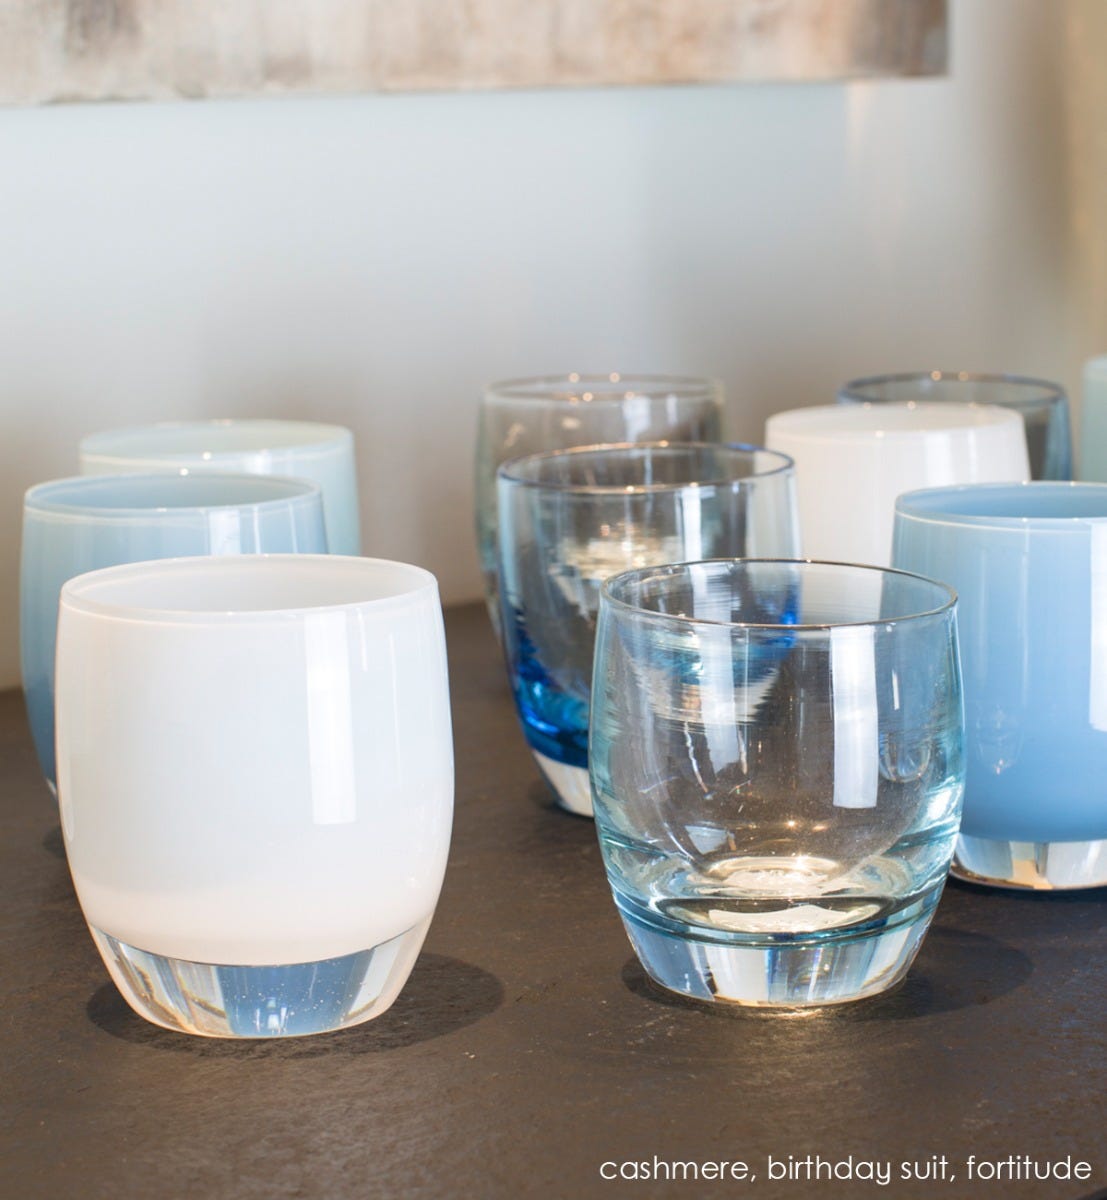 cashmere white with touch of blue hand-blown glass votive candle holder. Paired with birthday suit and fortitude.